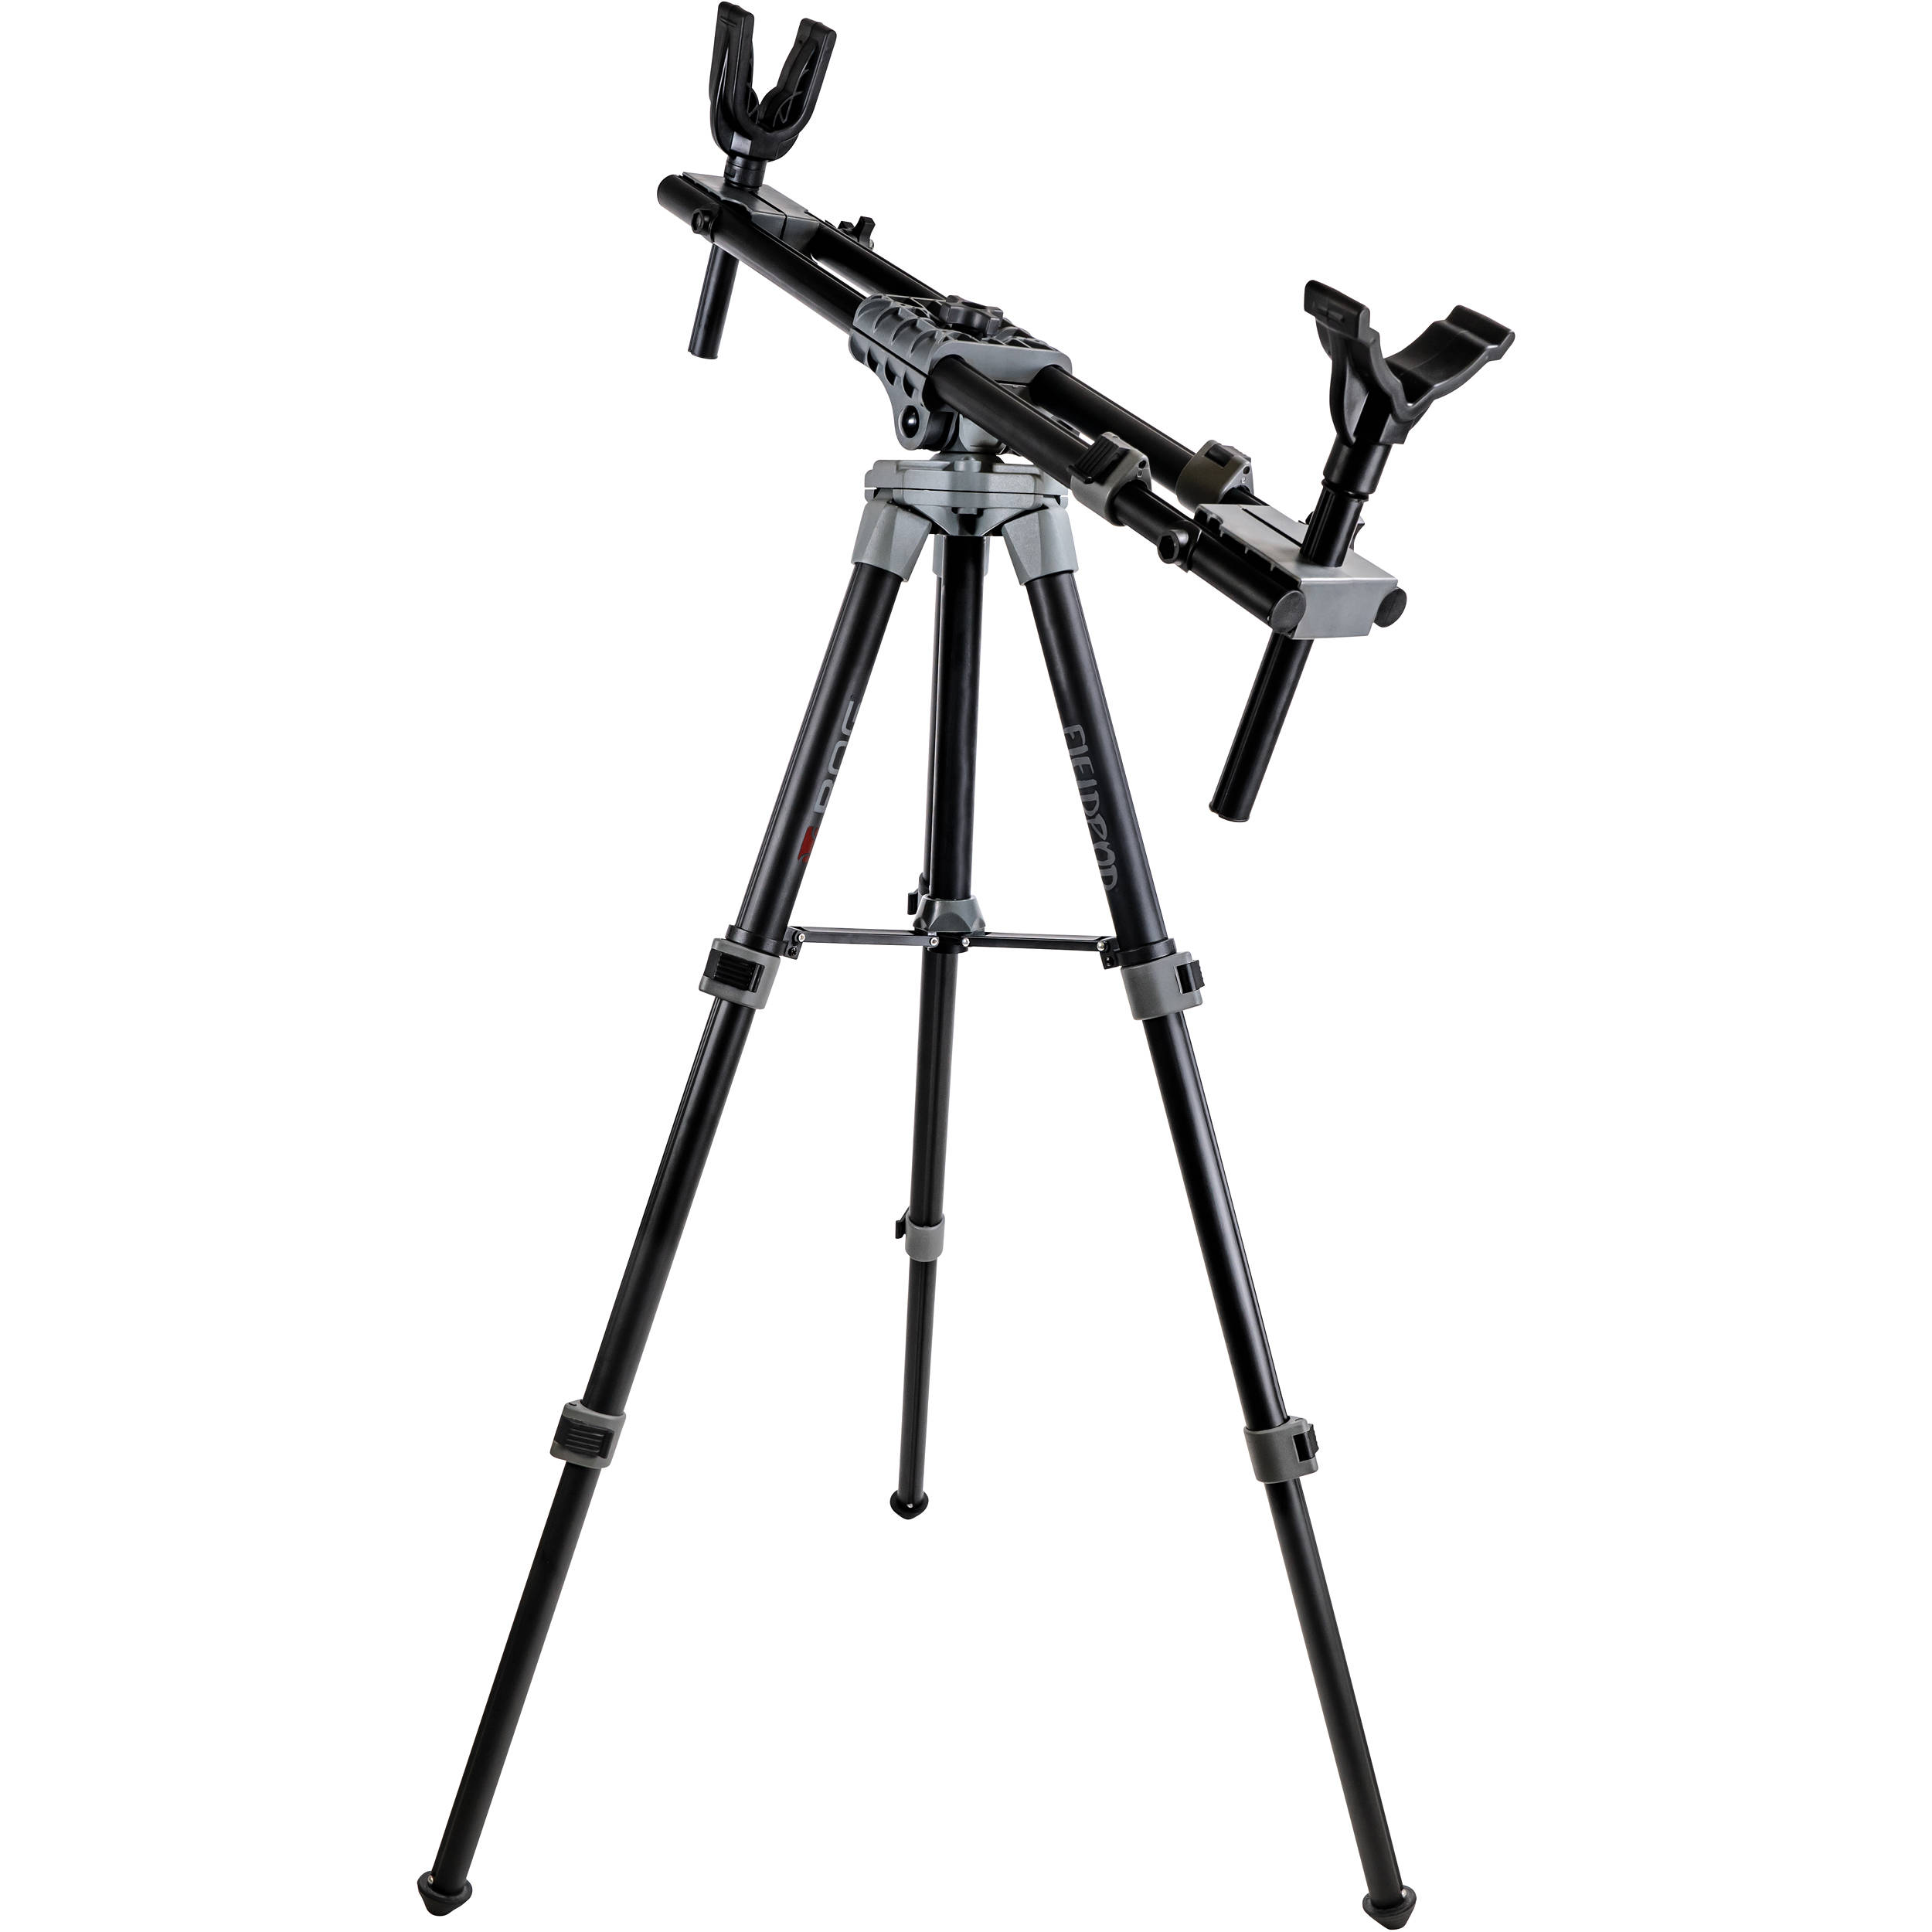 Boggear Chairpod Field Shooting Rest 1100475 B H Photo Video